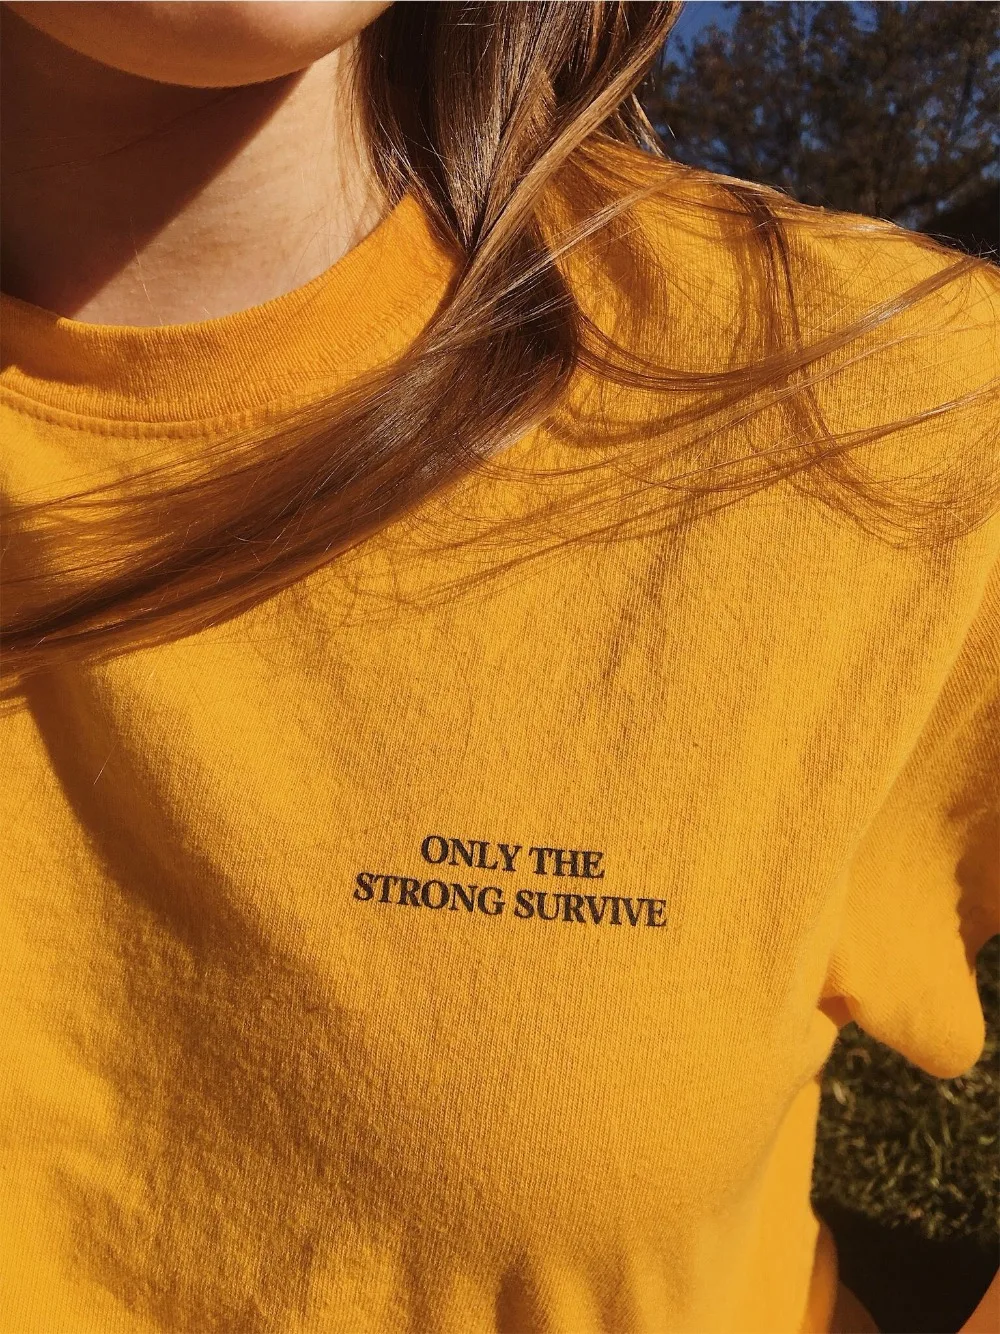 Skuggnas Only the strong survive t shirt women fashion slogan passion tees 90s girl letter print grunge tumblr tops art shirt